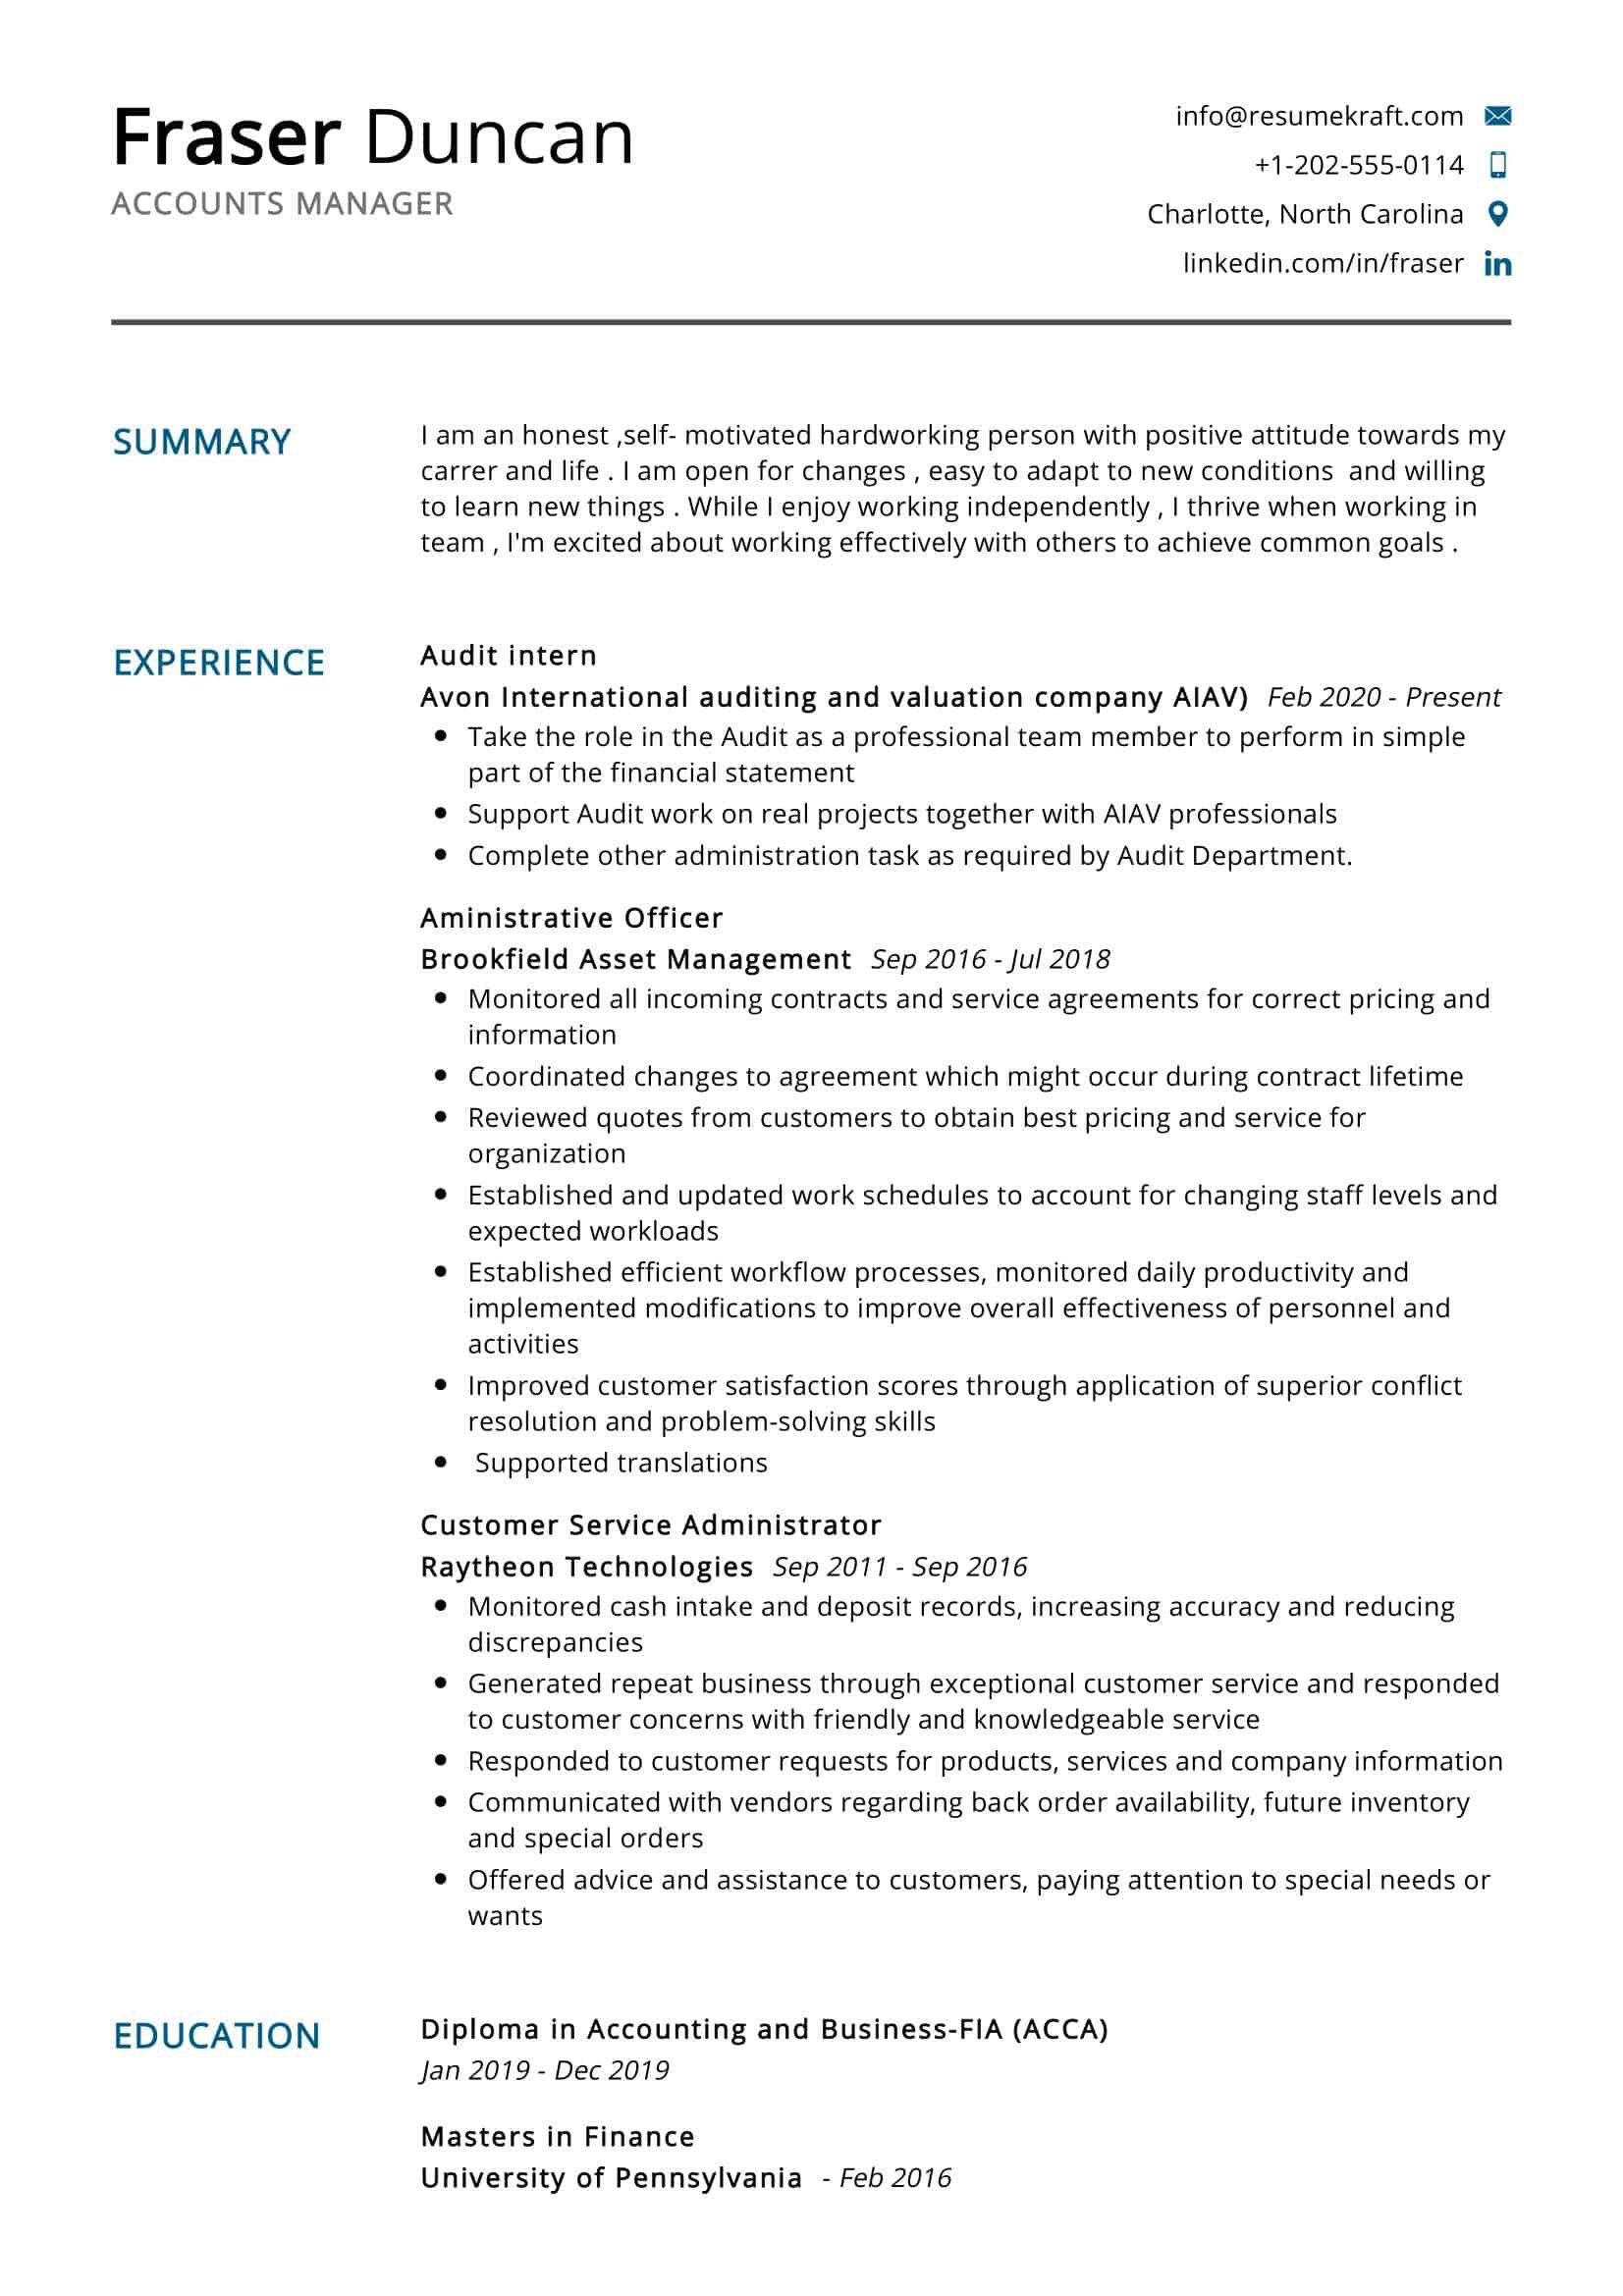 Sample Resume for Account Manager Position Accounts Manager Resume Sample Resumekraft